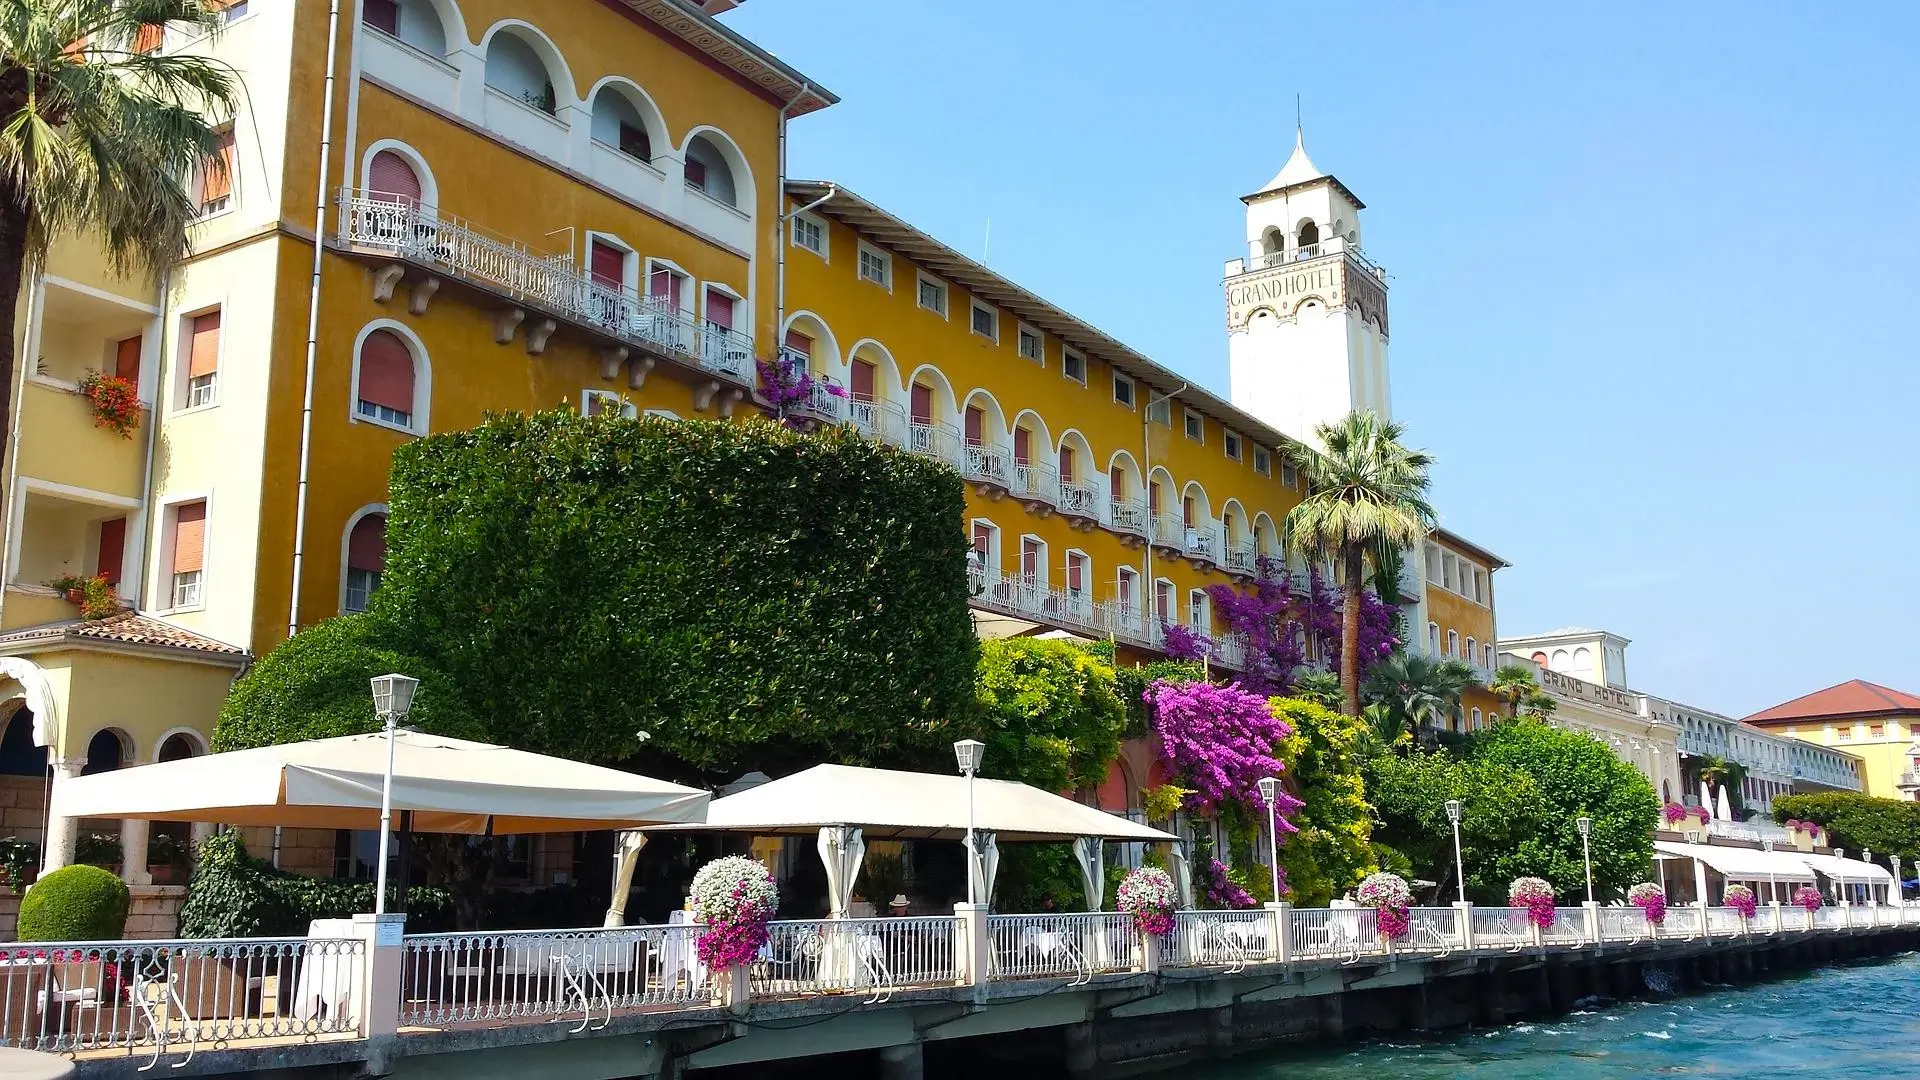 Gardone Riviera: things to see and do